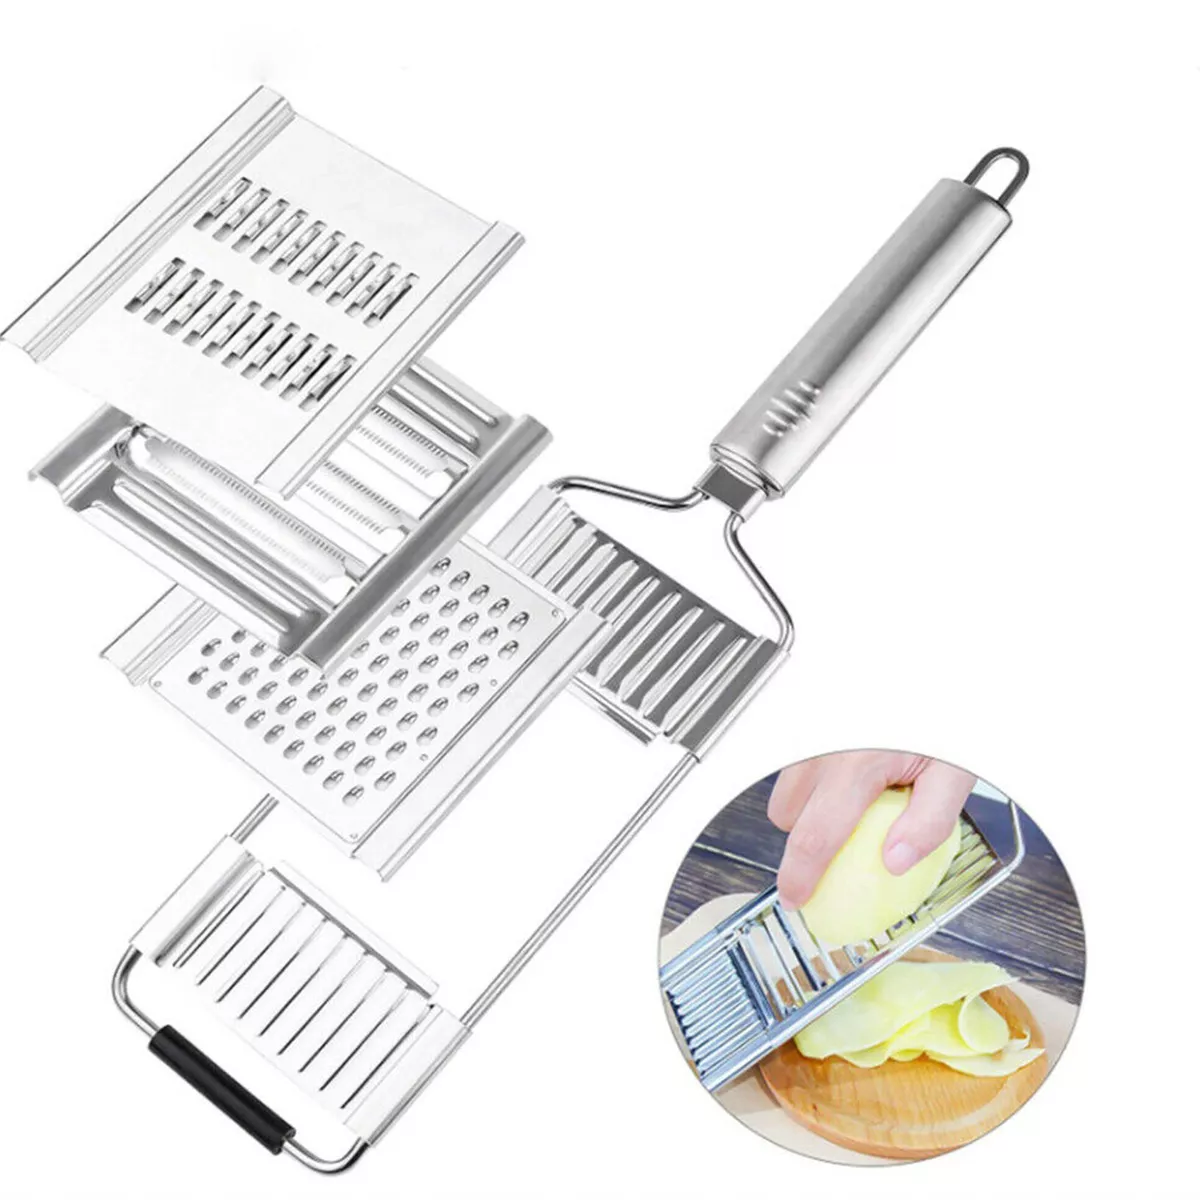 Stainless Steel Cheese Grater for Kitchen Tools 1 piece